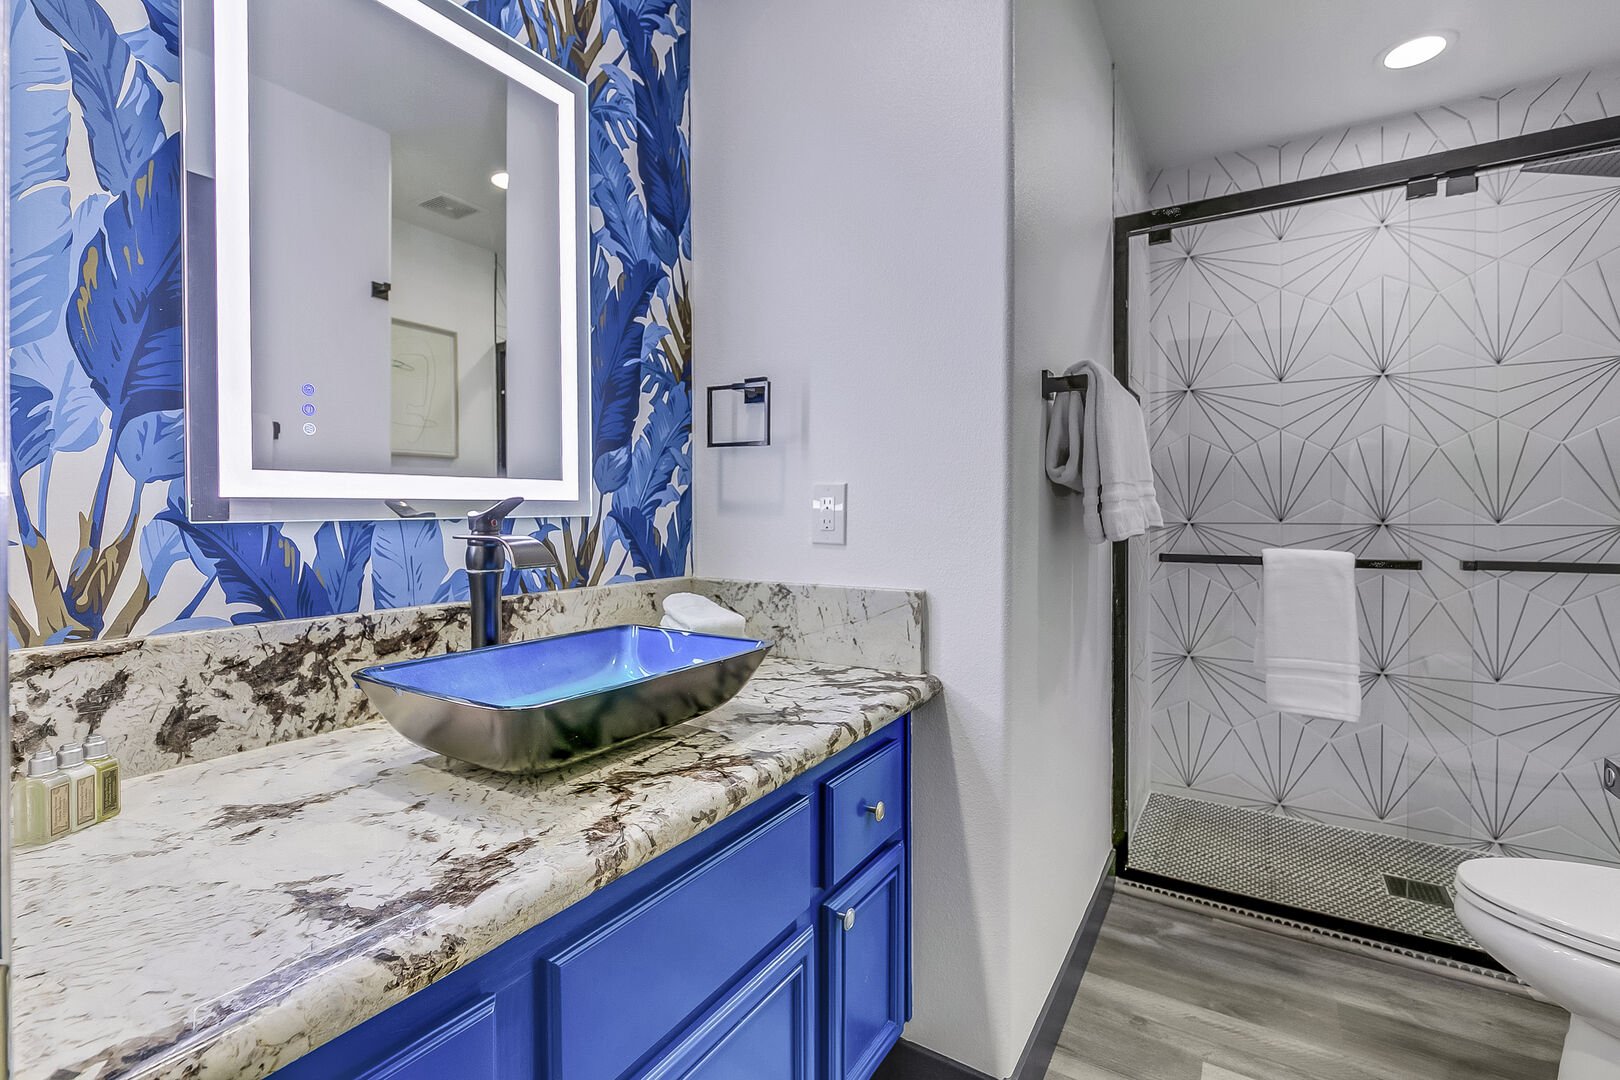 Hallway Bathroom 4 is located next to Bedroom 4 and features a a tile shower and decorative vanity sink.